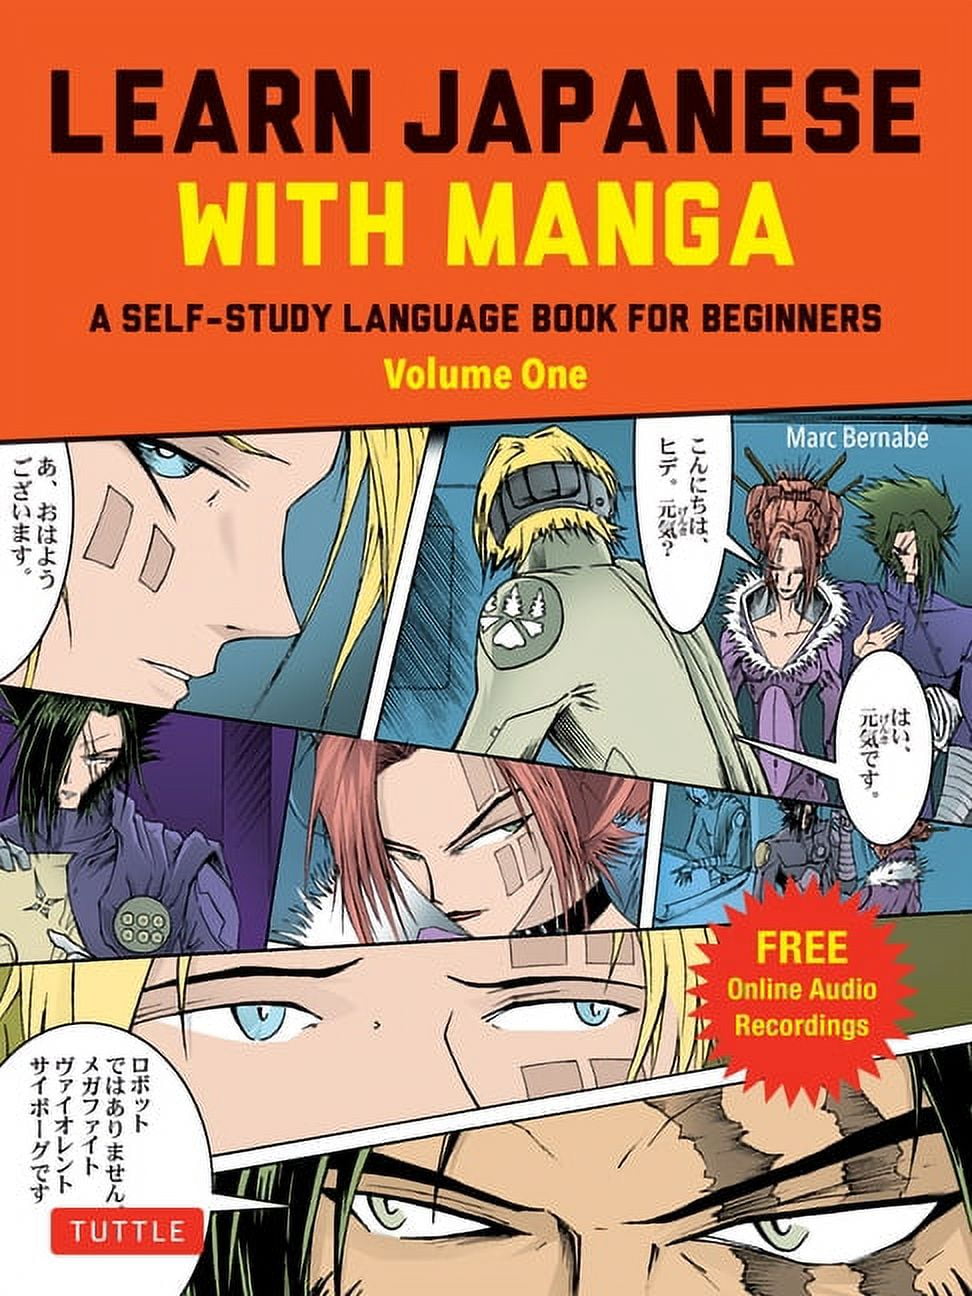 What are some good manga that teach you how to read and write